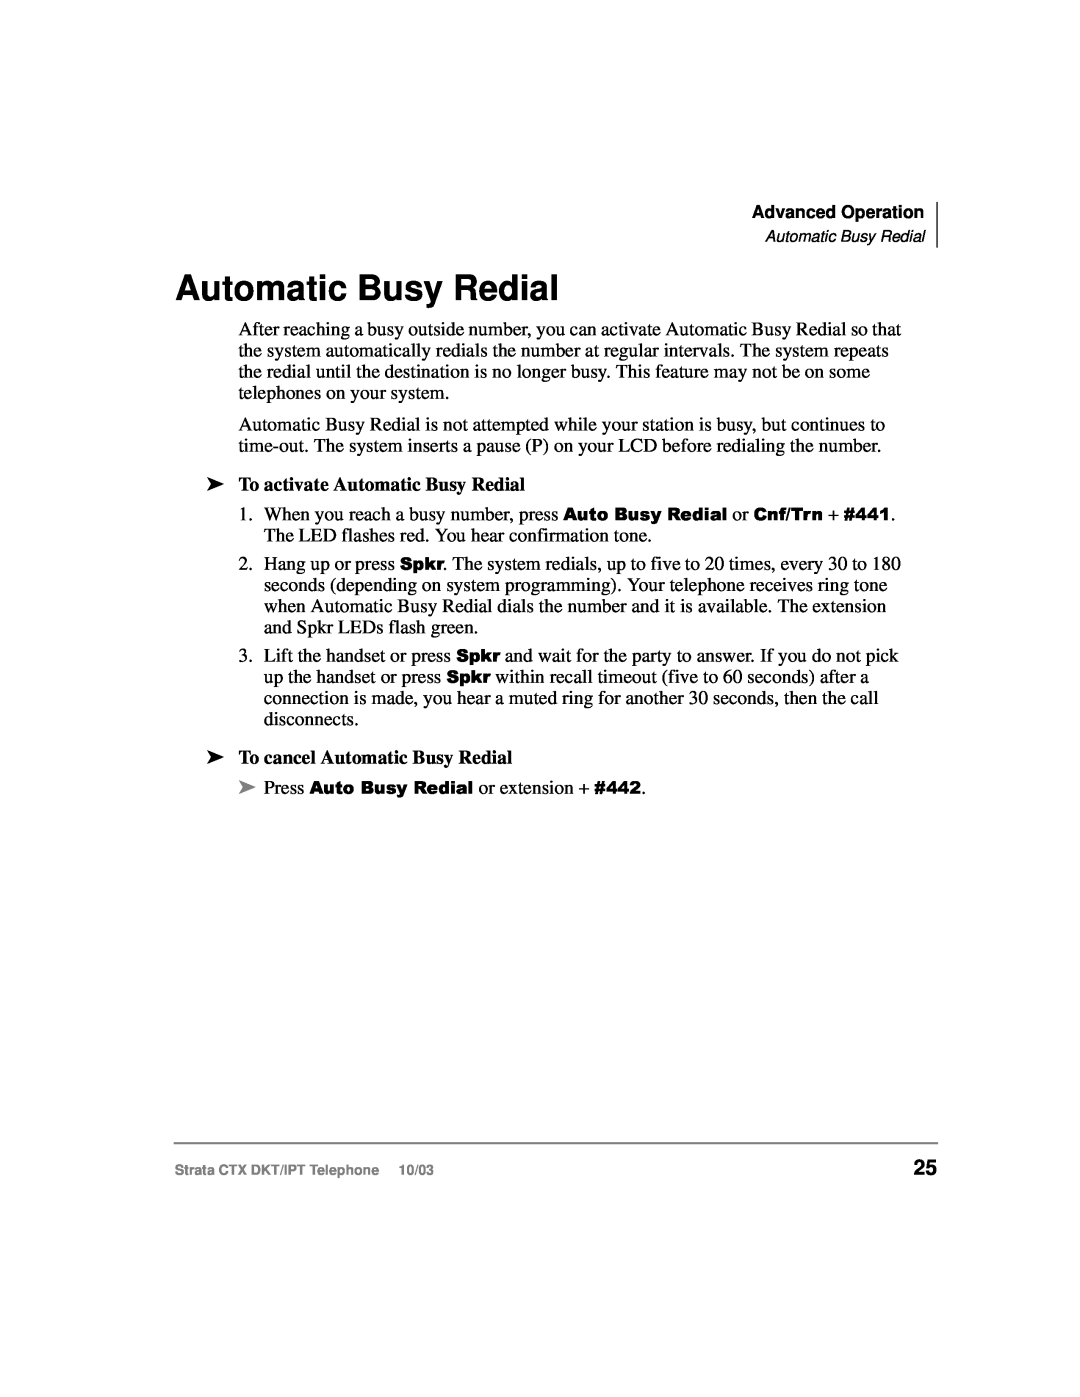 Toshiba DKT, IPT manual To activate Automatic Busy Redial, To cancel Automatic Busy Redial 